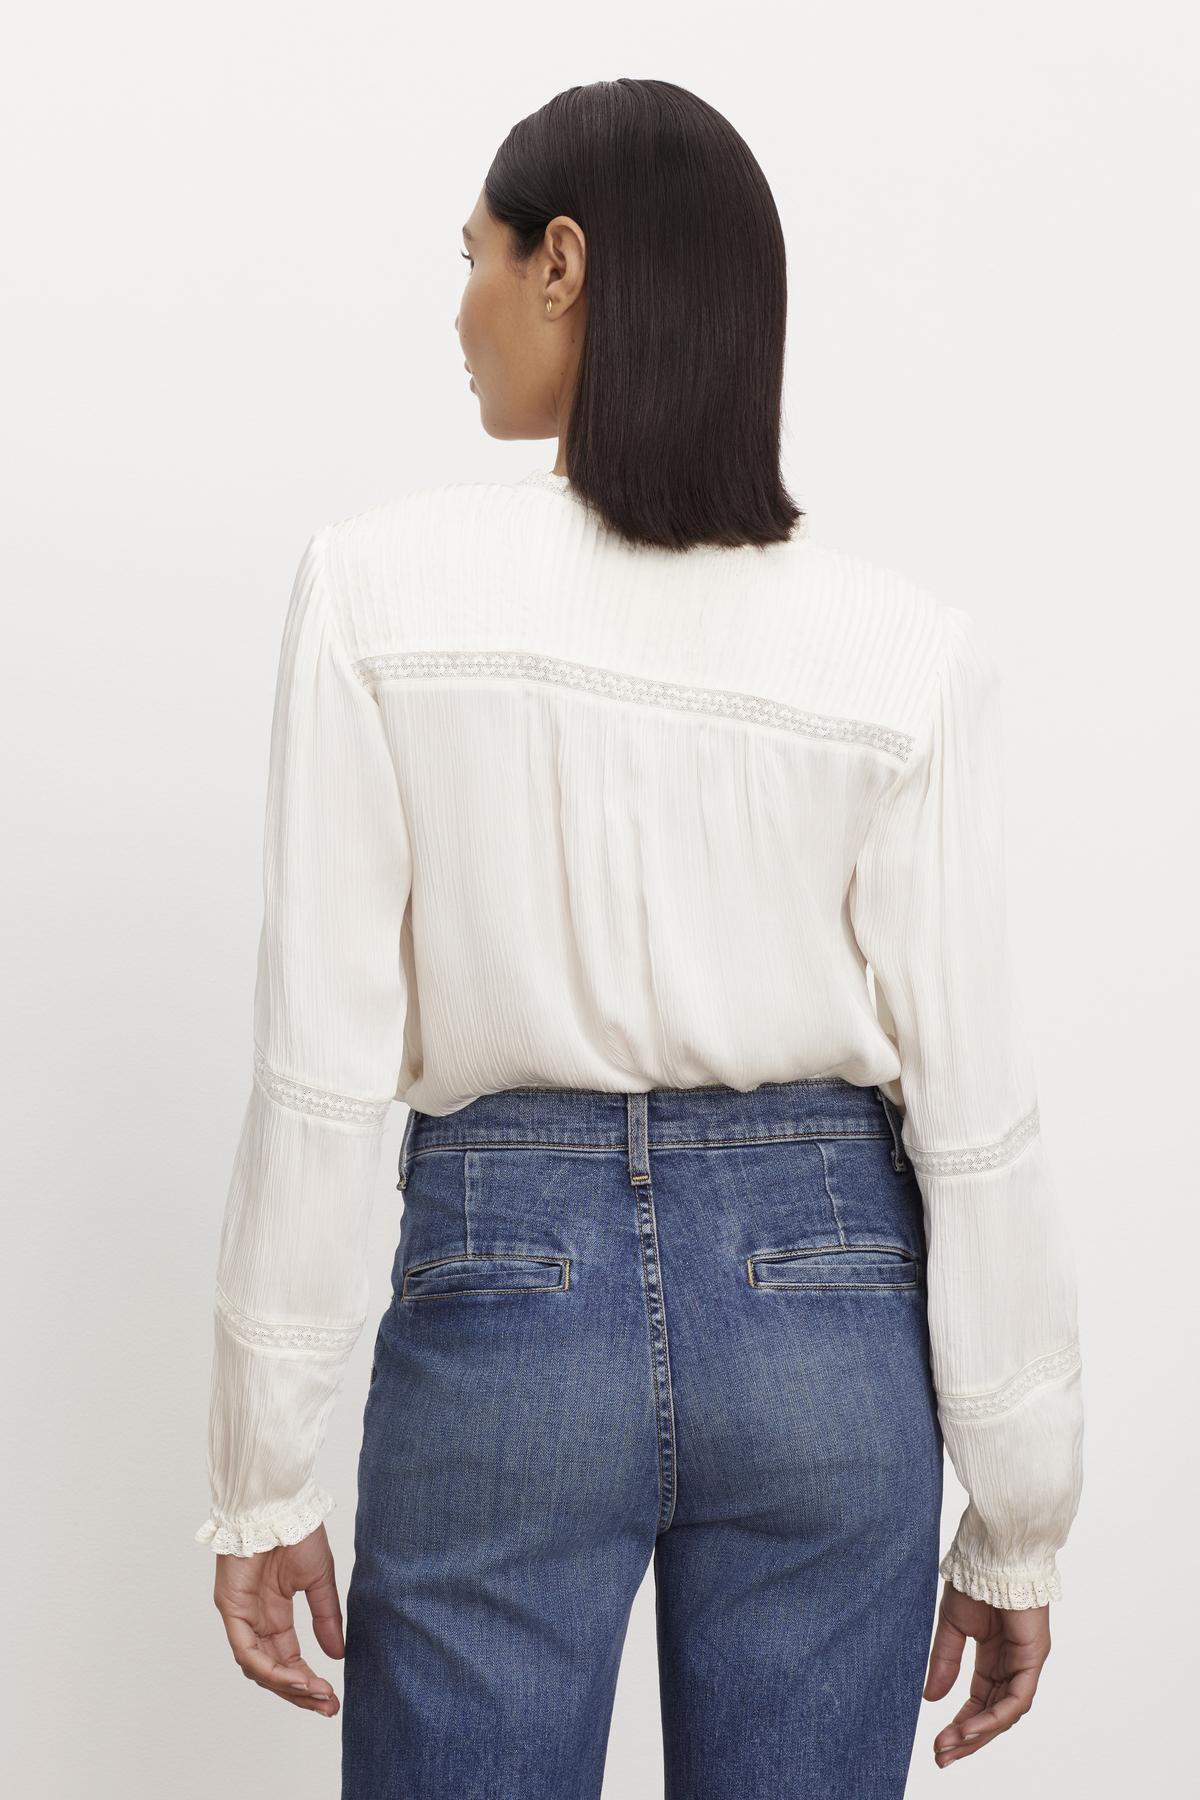   The view of a woman wearing jeans and a KOREN V-NECK BLOUSE by Velvet by Graham & Spencer. 